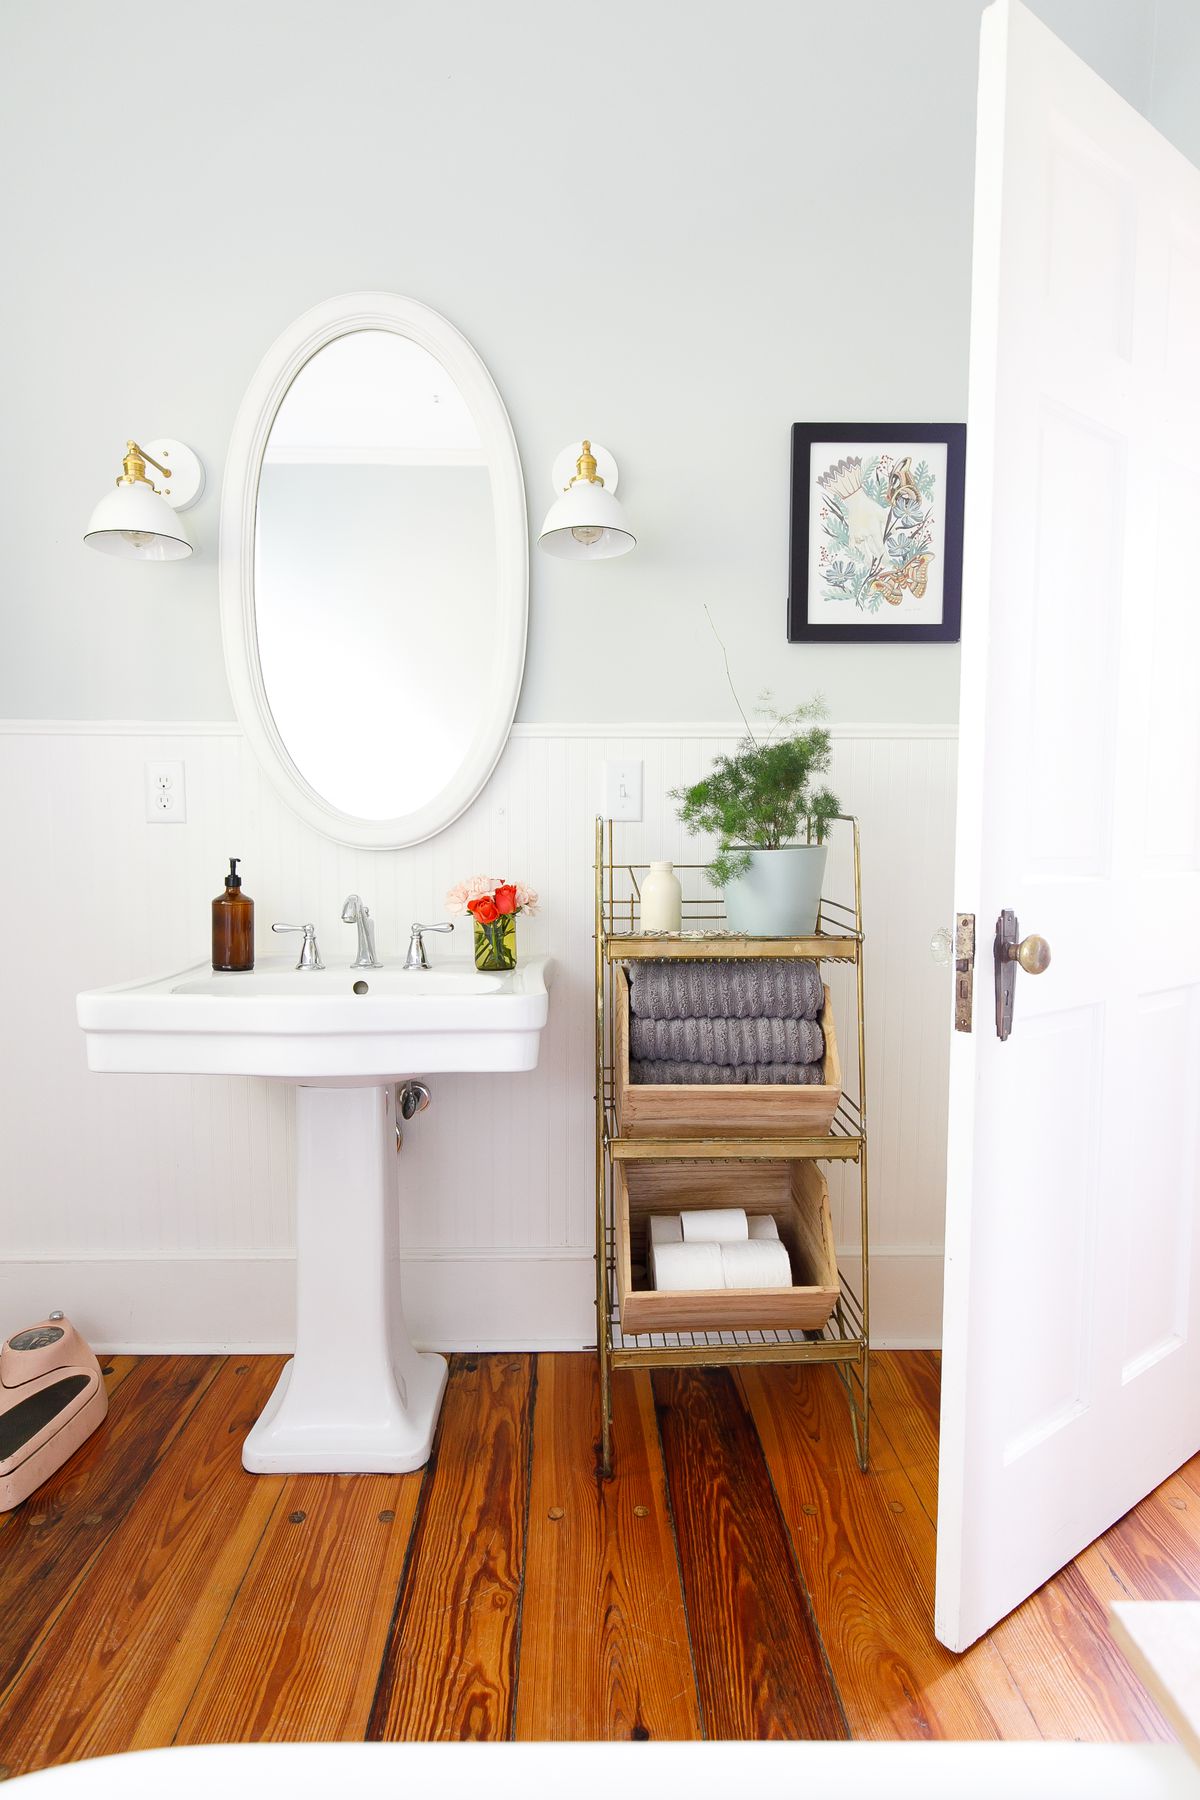 Bathroom ideas to take your decor and storage up a notch - Curbed